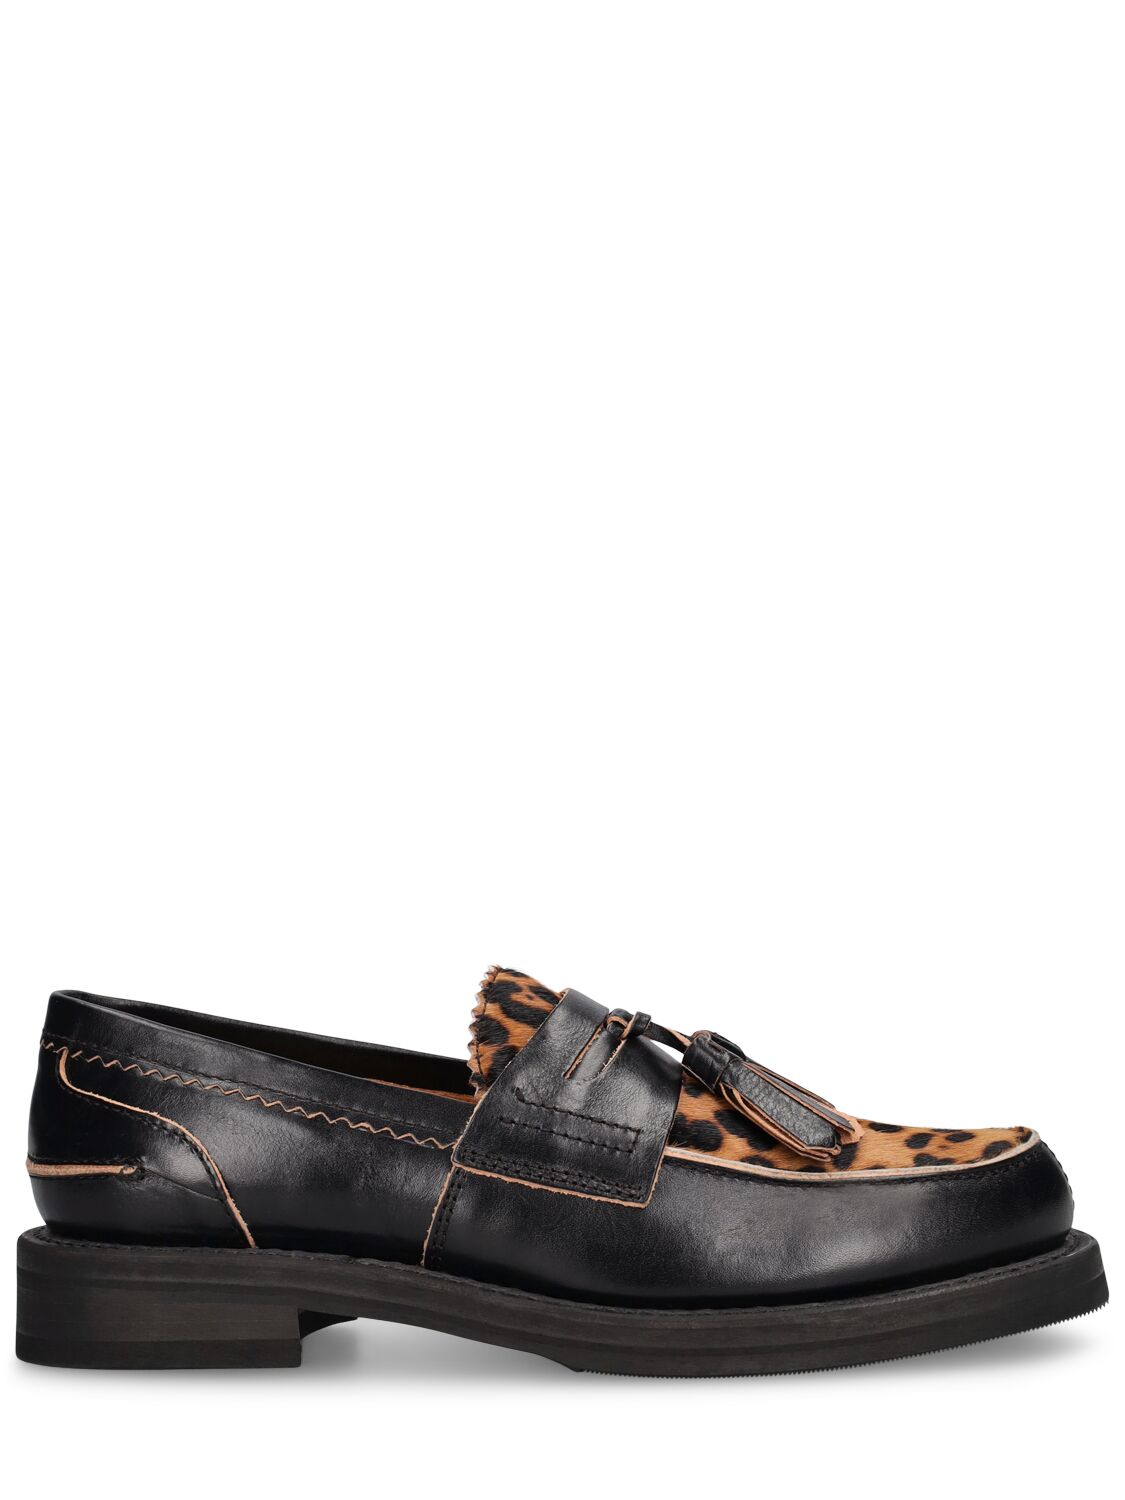 Image of Leather Tassel Loafers